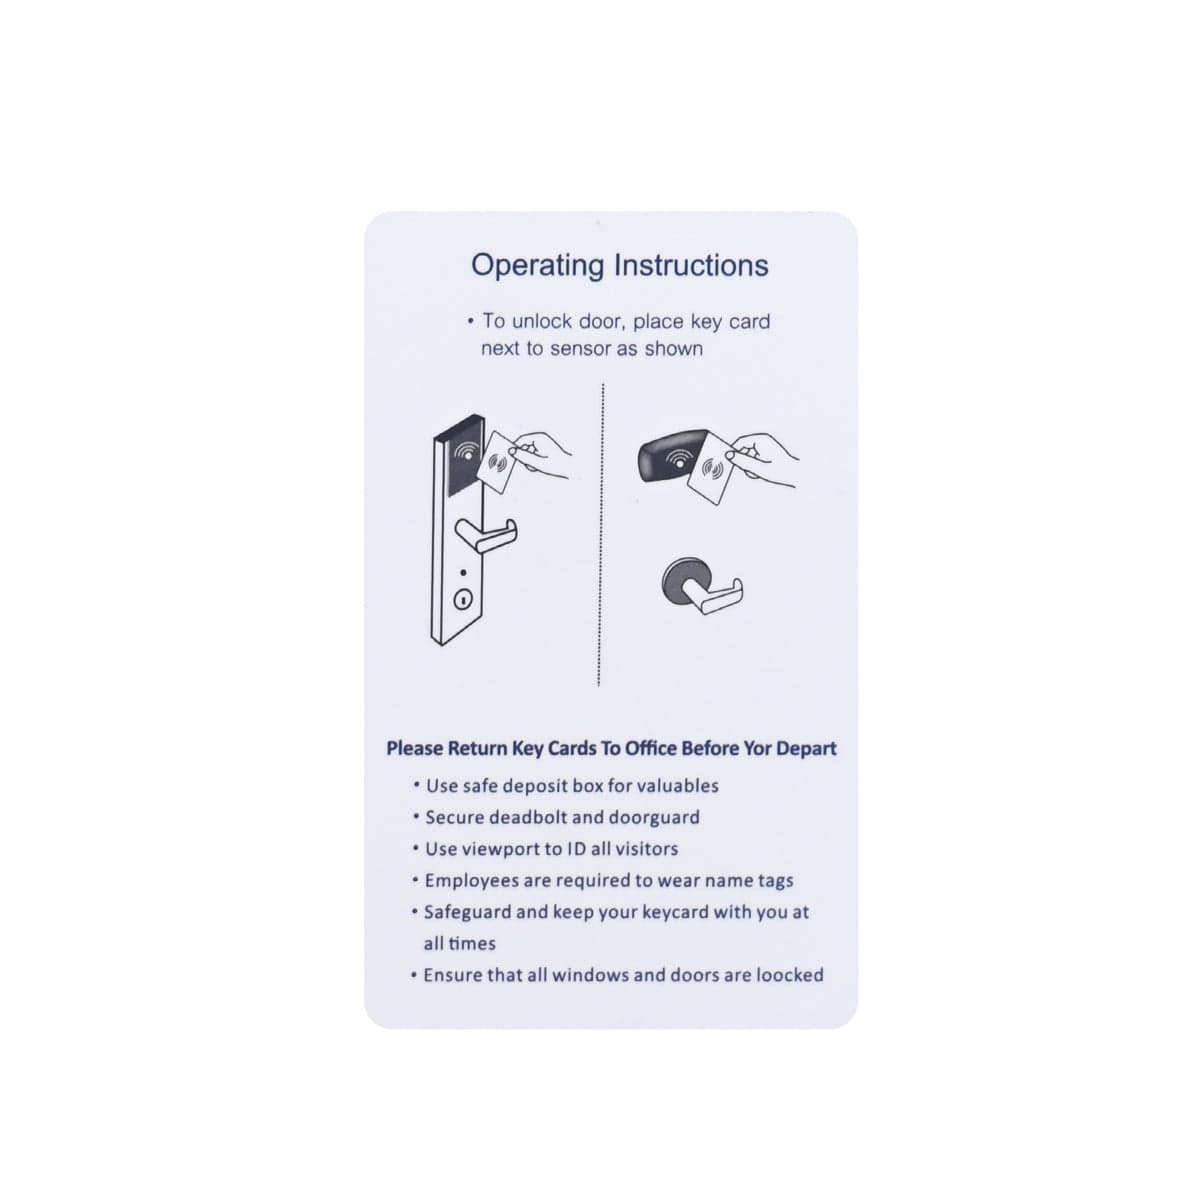 Generic White 1K RFID Key Cards Compatible with Assa Abloy* Guest Lock Systems-See Description (Sold in boxes of 200)